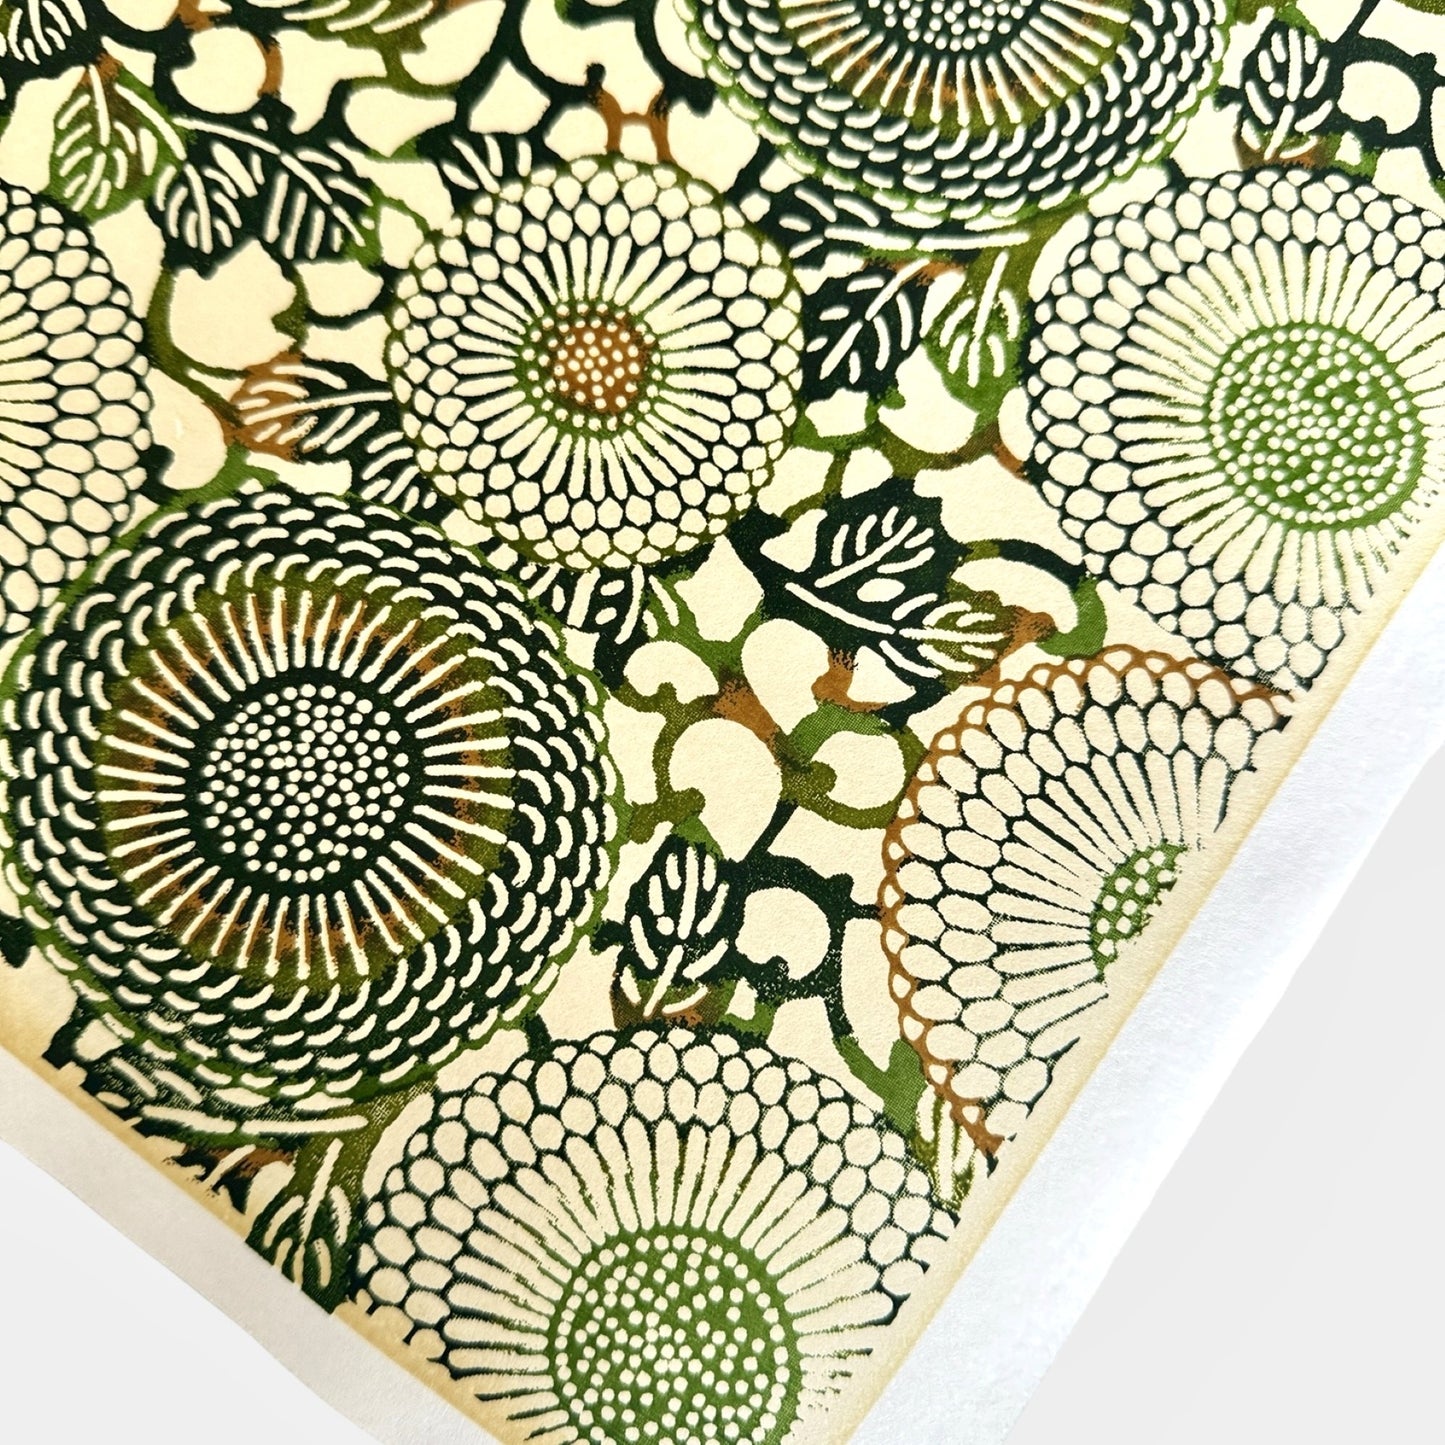 Japanese silkscreen chiyogami paper with a repeat pattern of stylised chrysanthemum flowers in tones of deep green on a buttermilk cream backdrop. Close-up